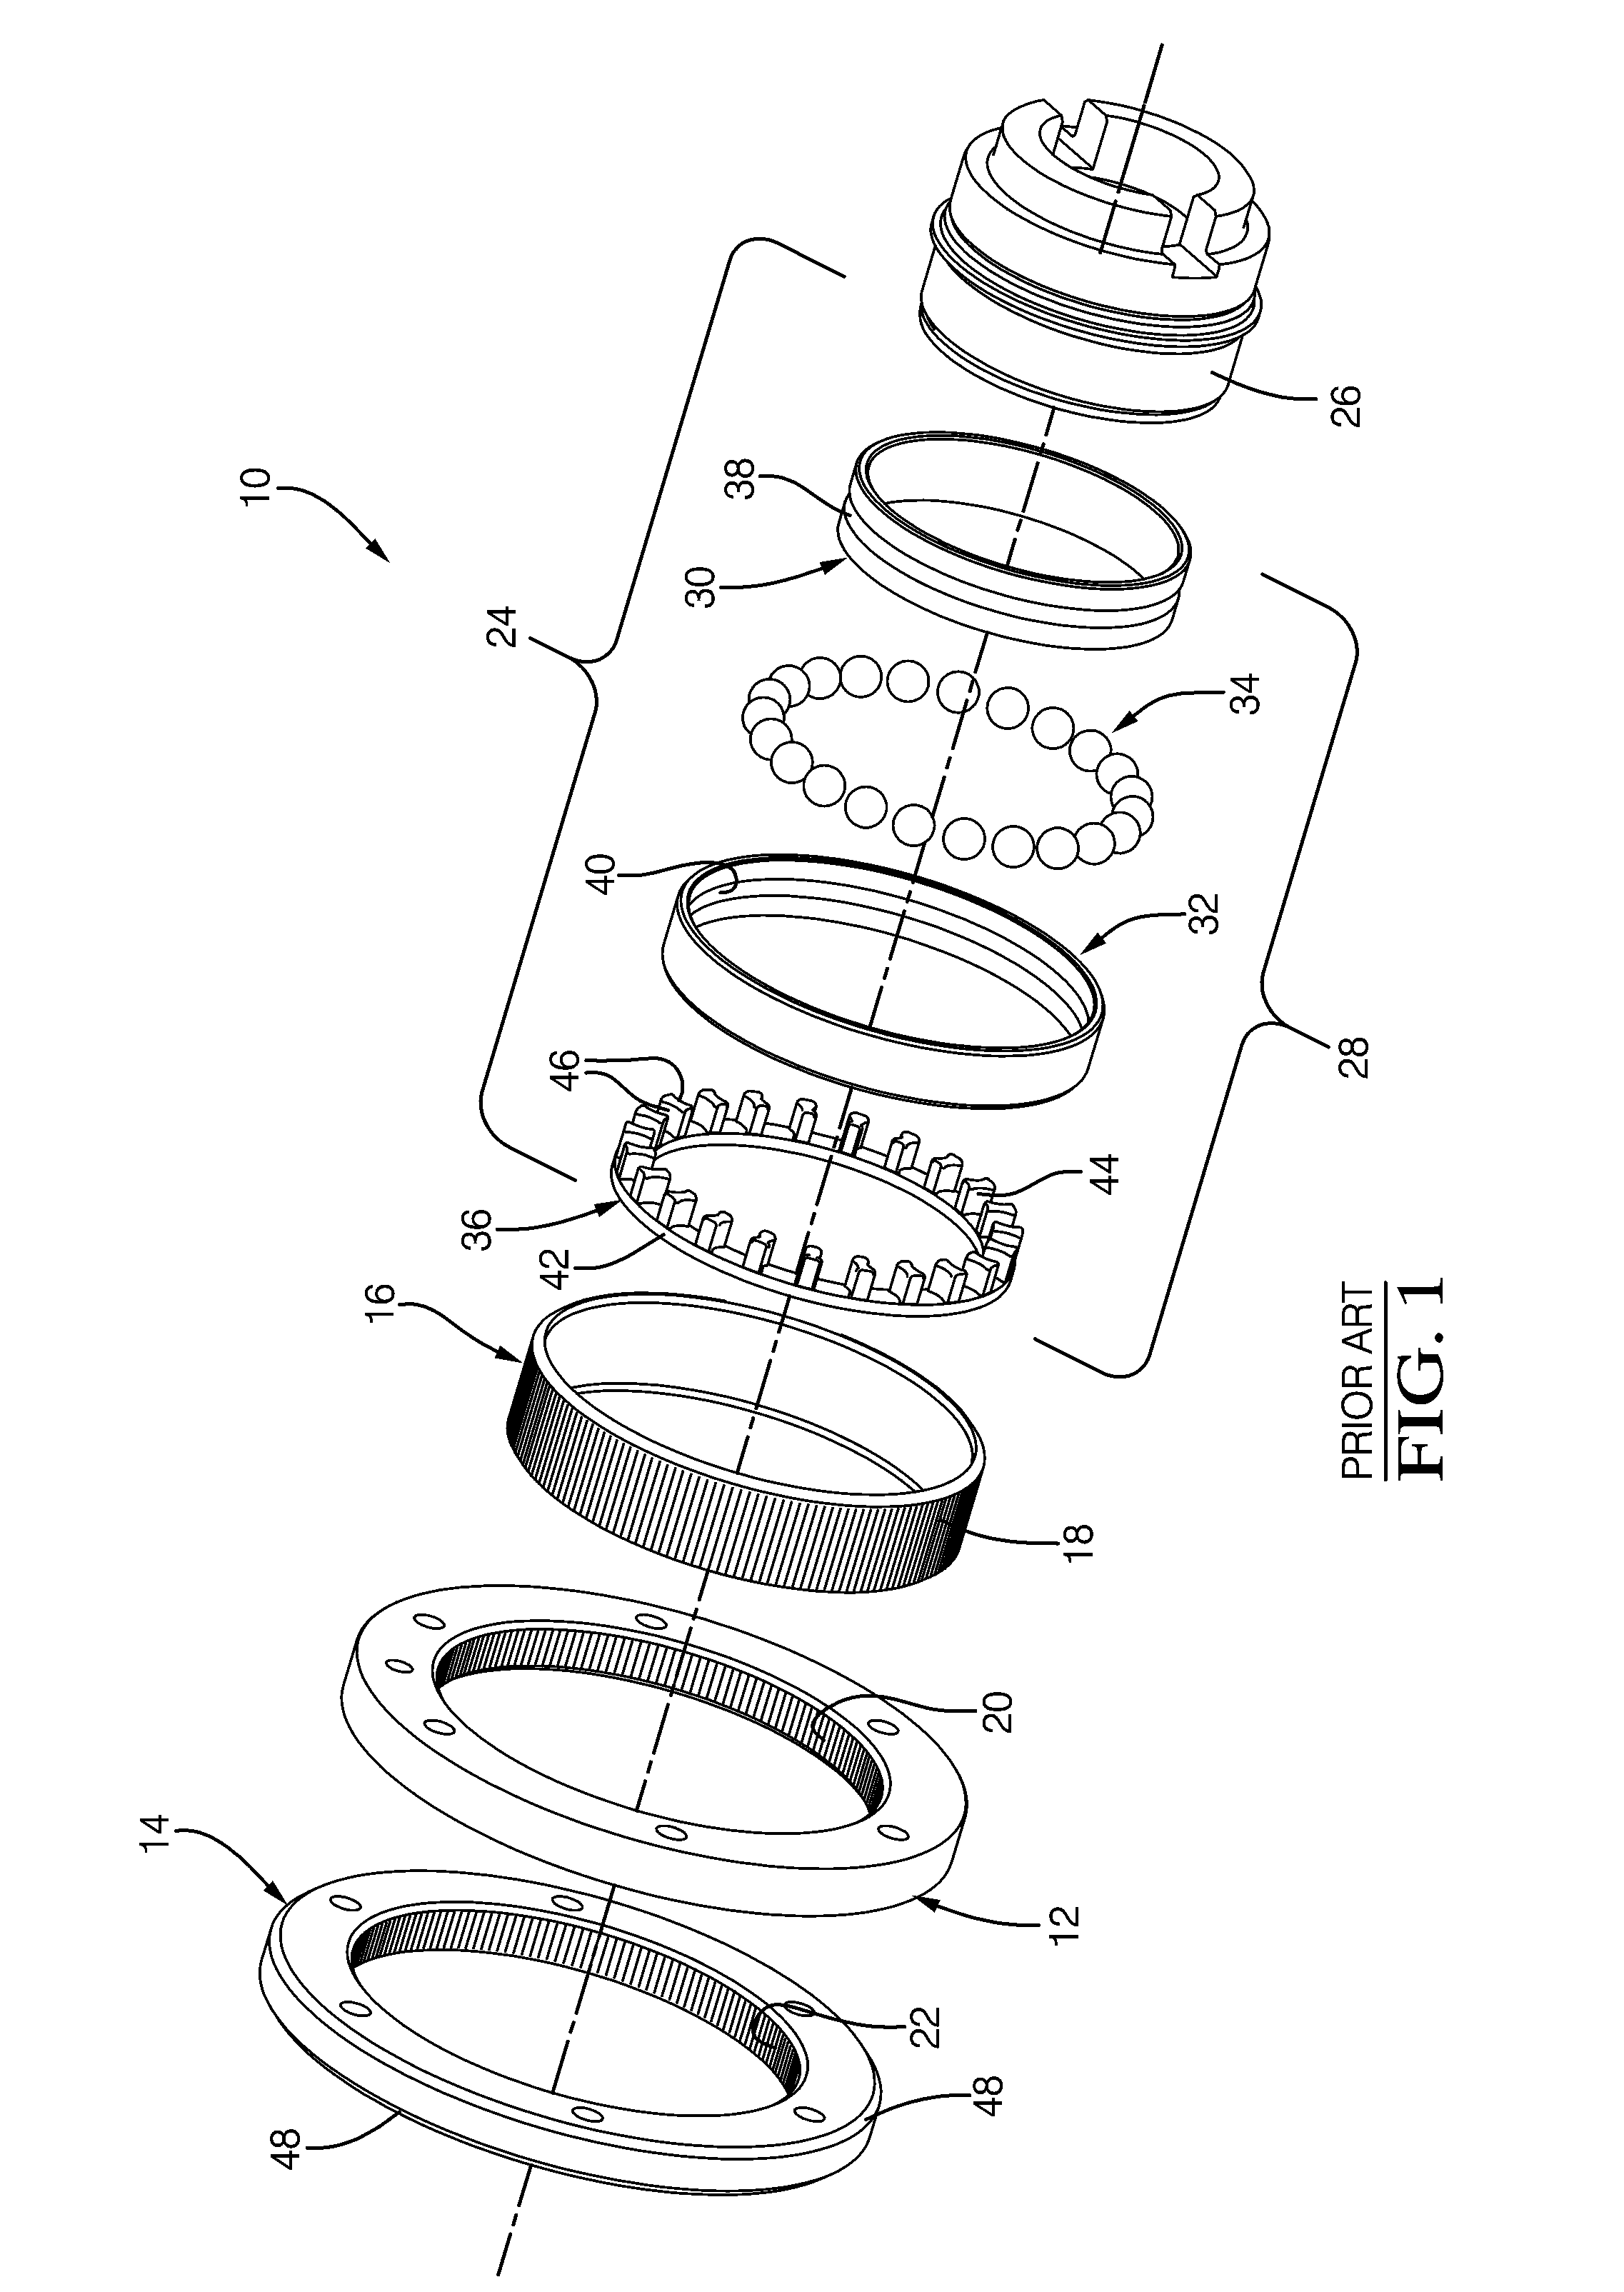 Harmonic Drive Camshaft Phaser with a Harmonic Drive Ring to Prevent Ball Cage Deflection